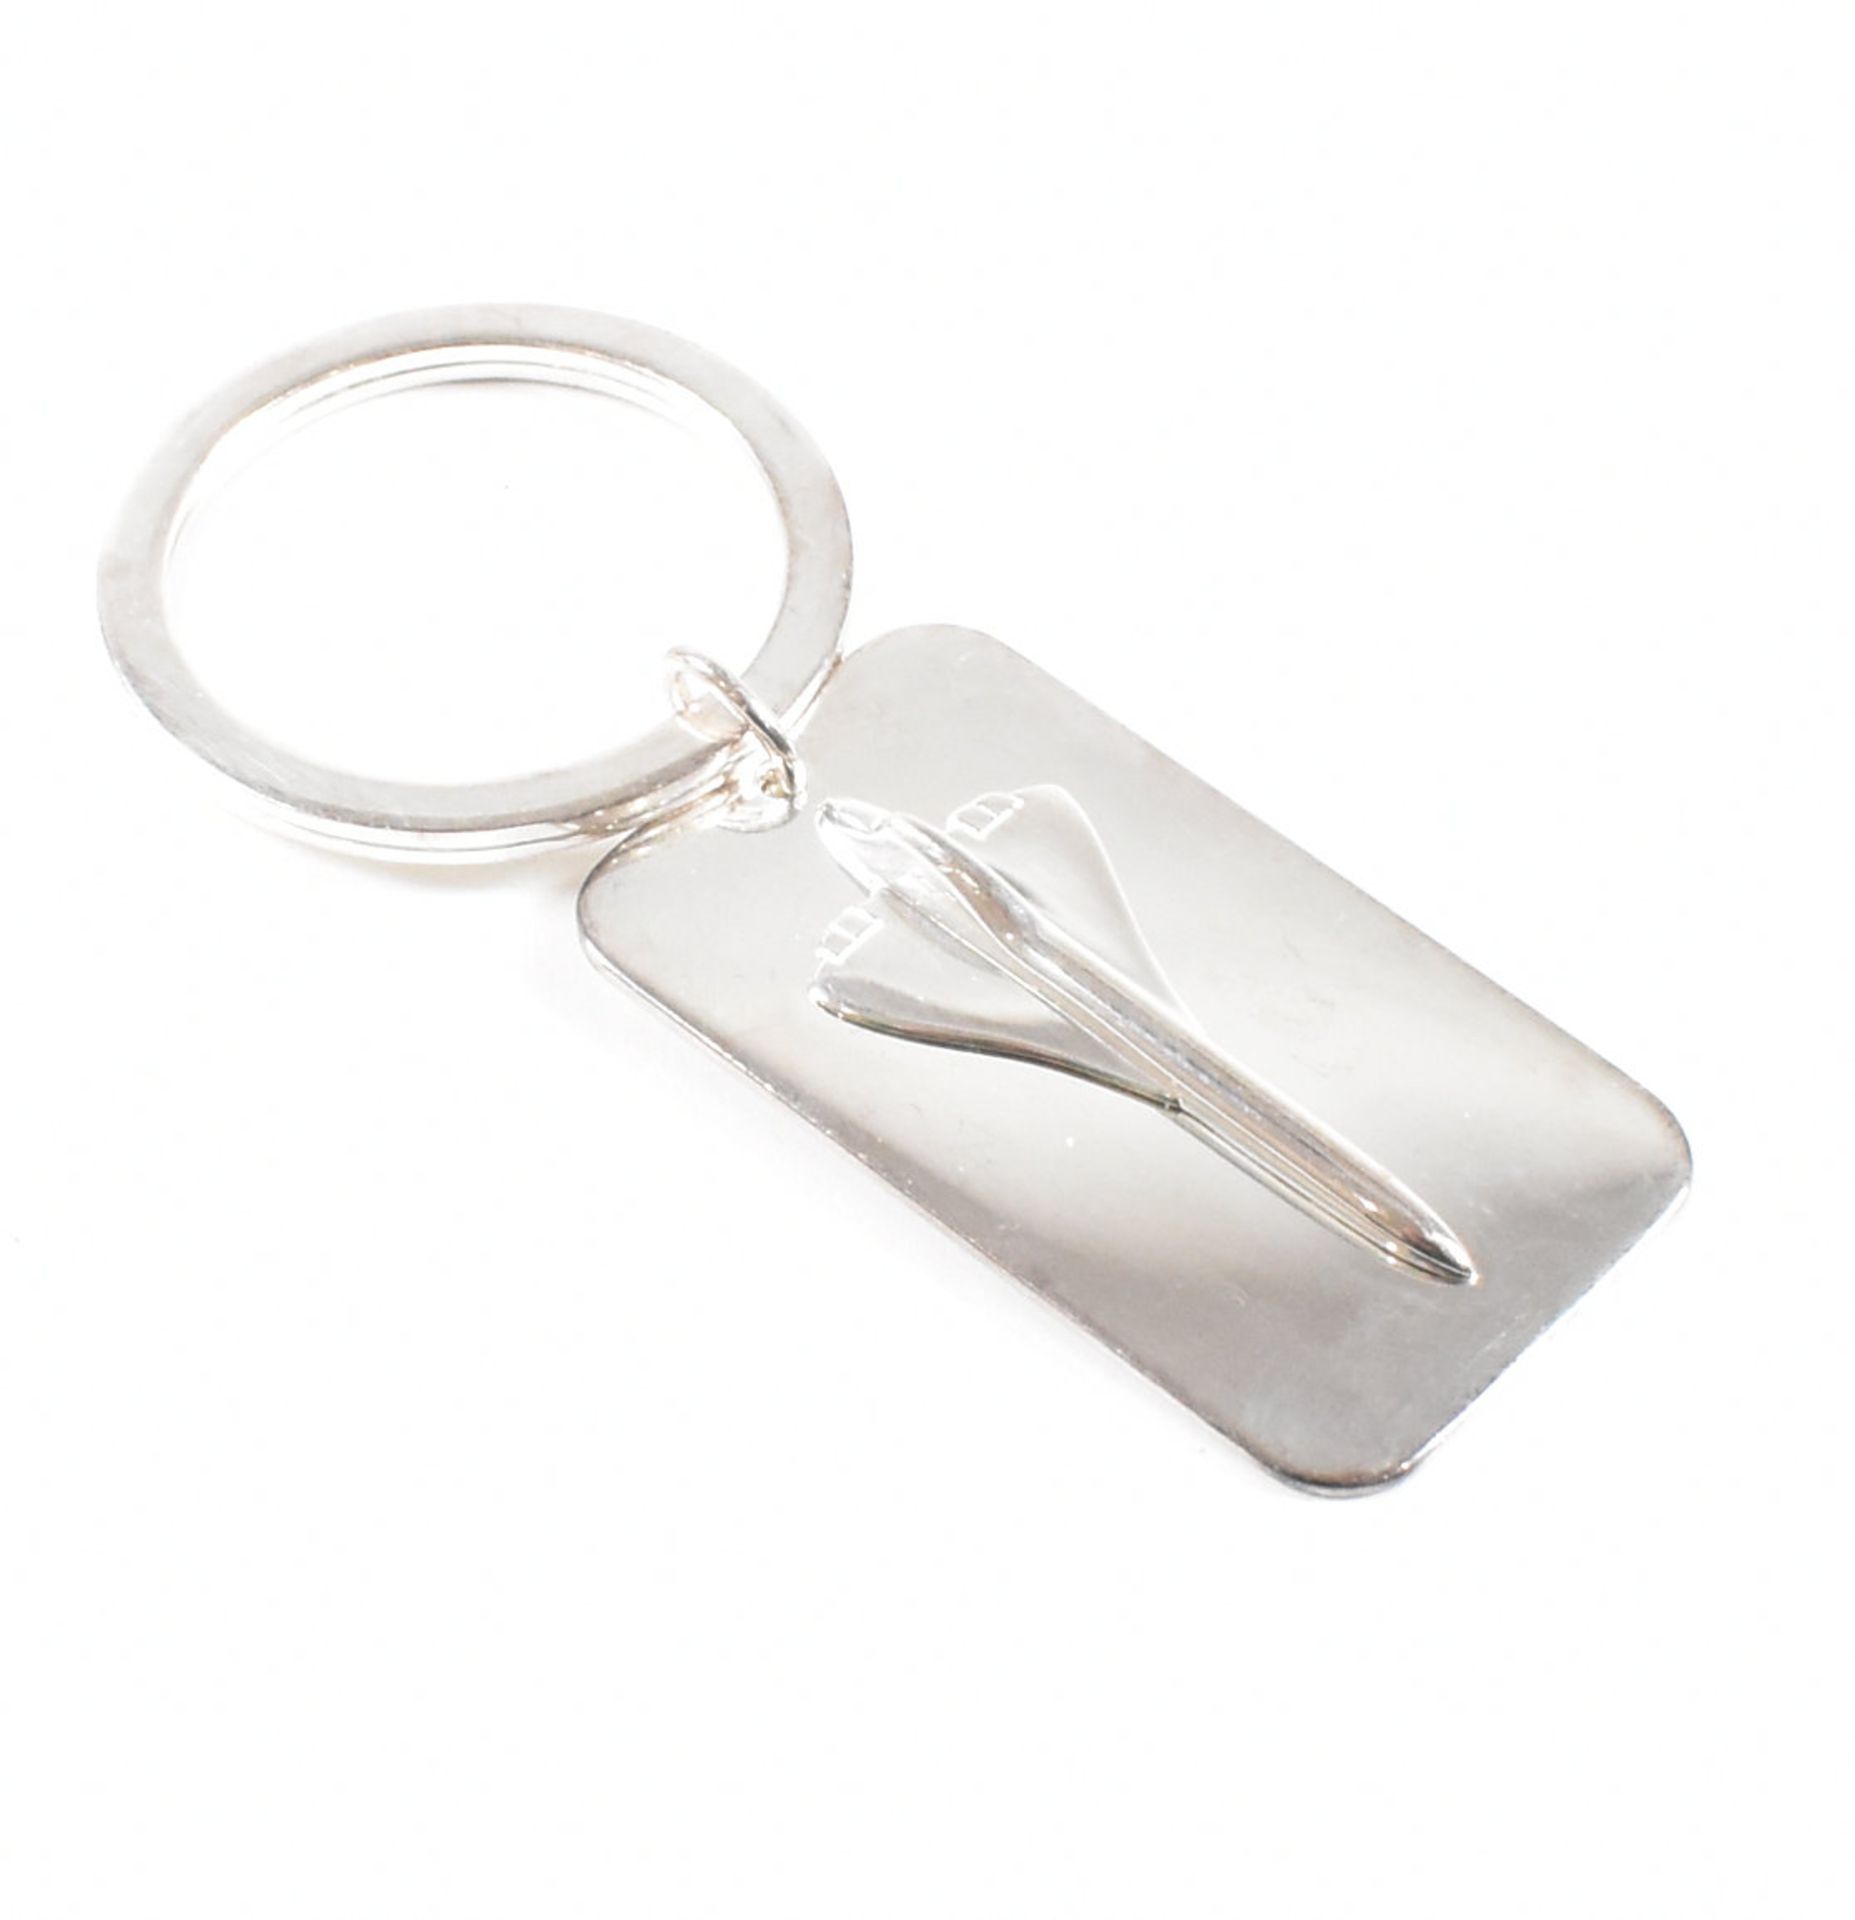 2003 LINKS OF LONDON HALLMARKED SILVER CONCORDE KEYRING - Image 4 of 5